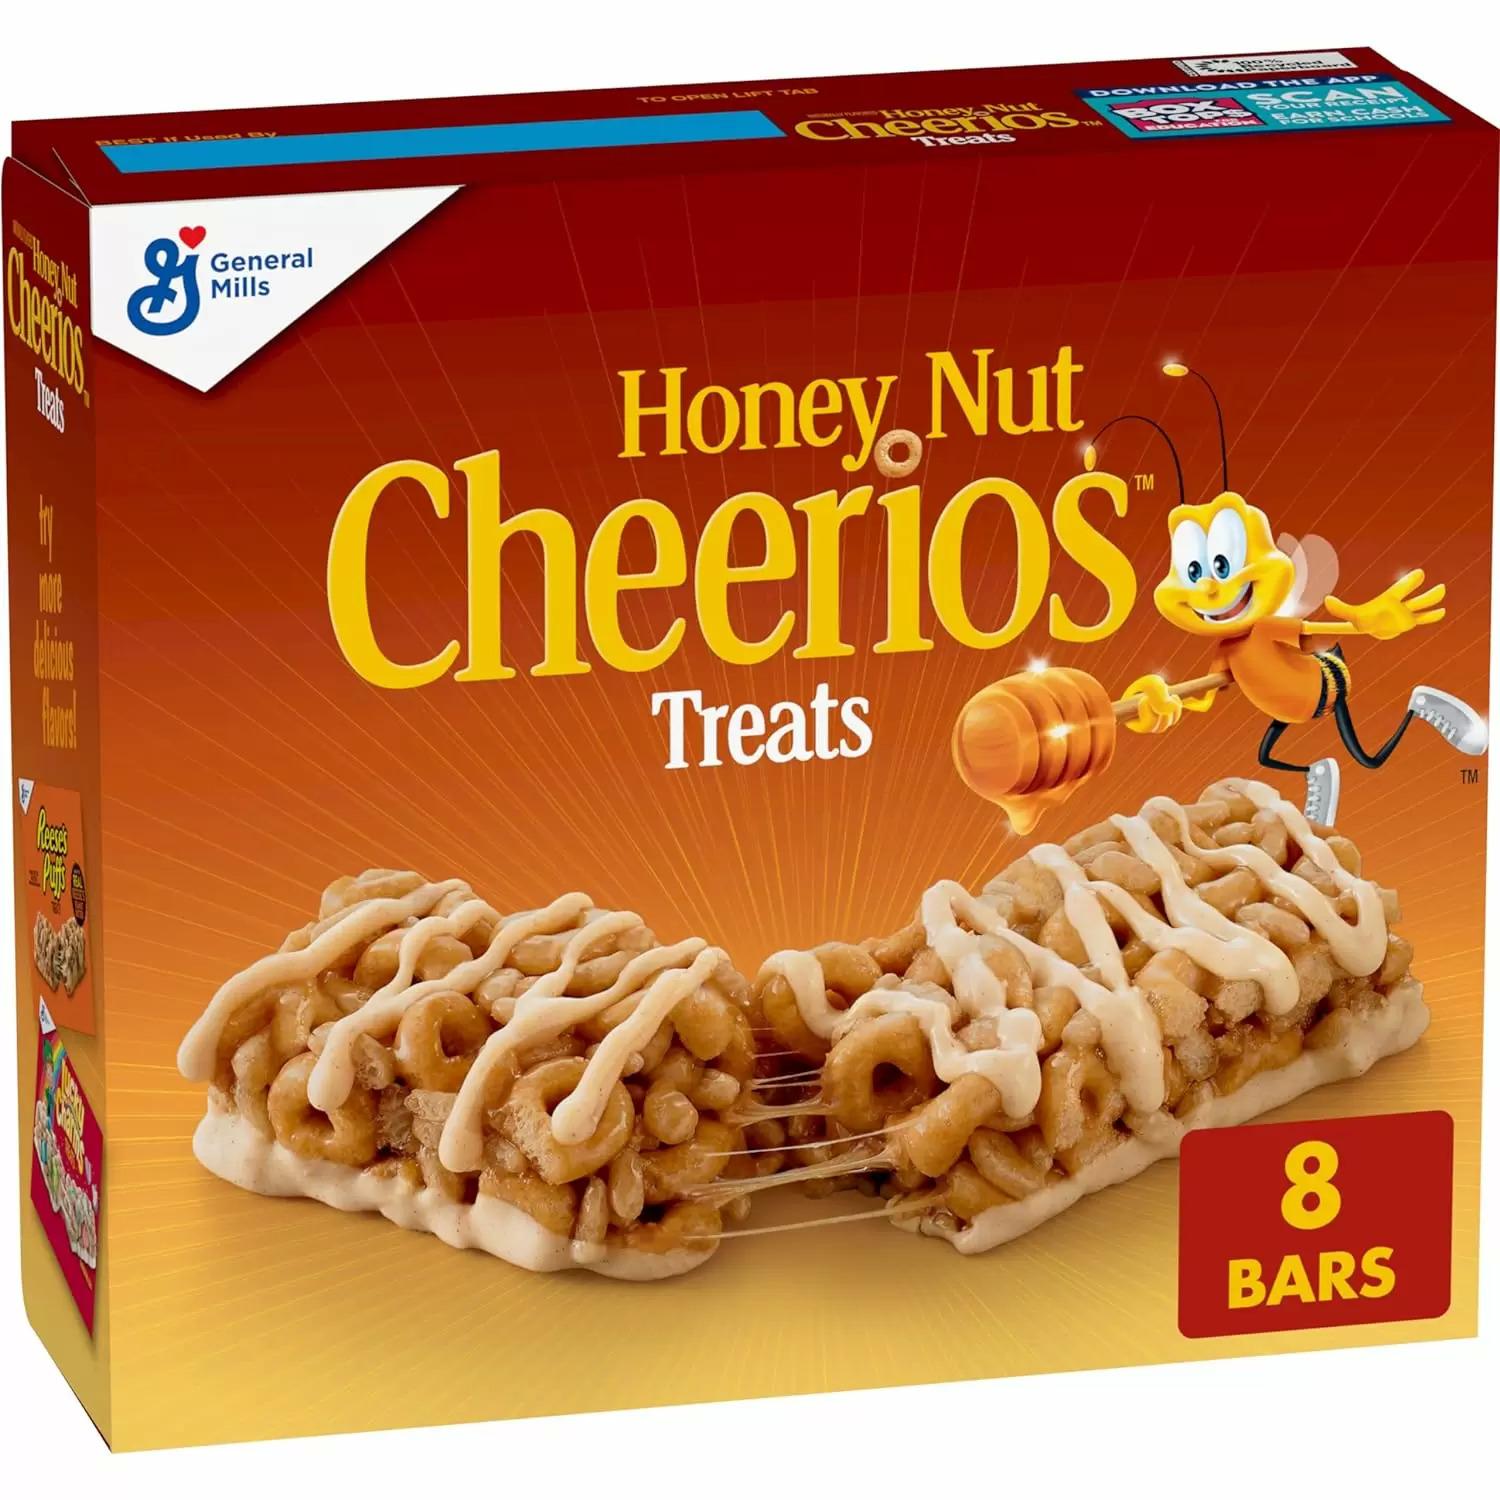 Honey Nut Cheerios Breakfast Cereal Treat Bars 8 Pack for $1.89